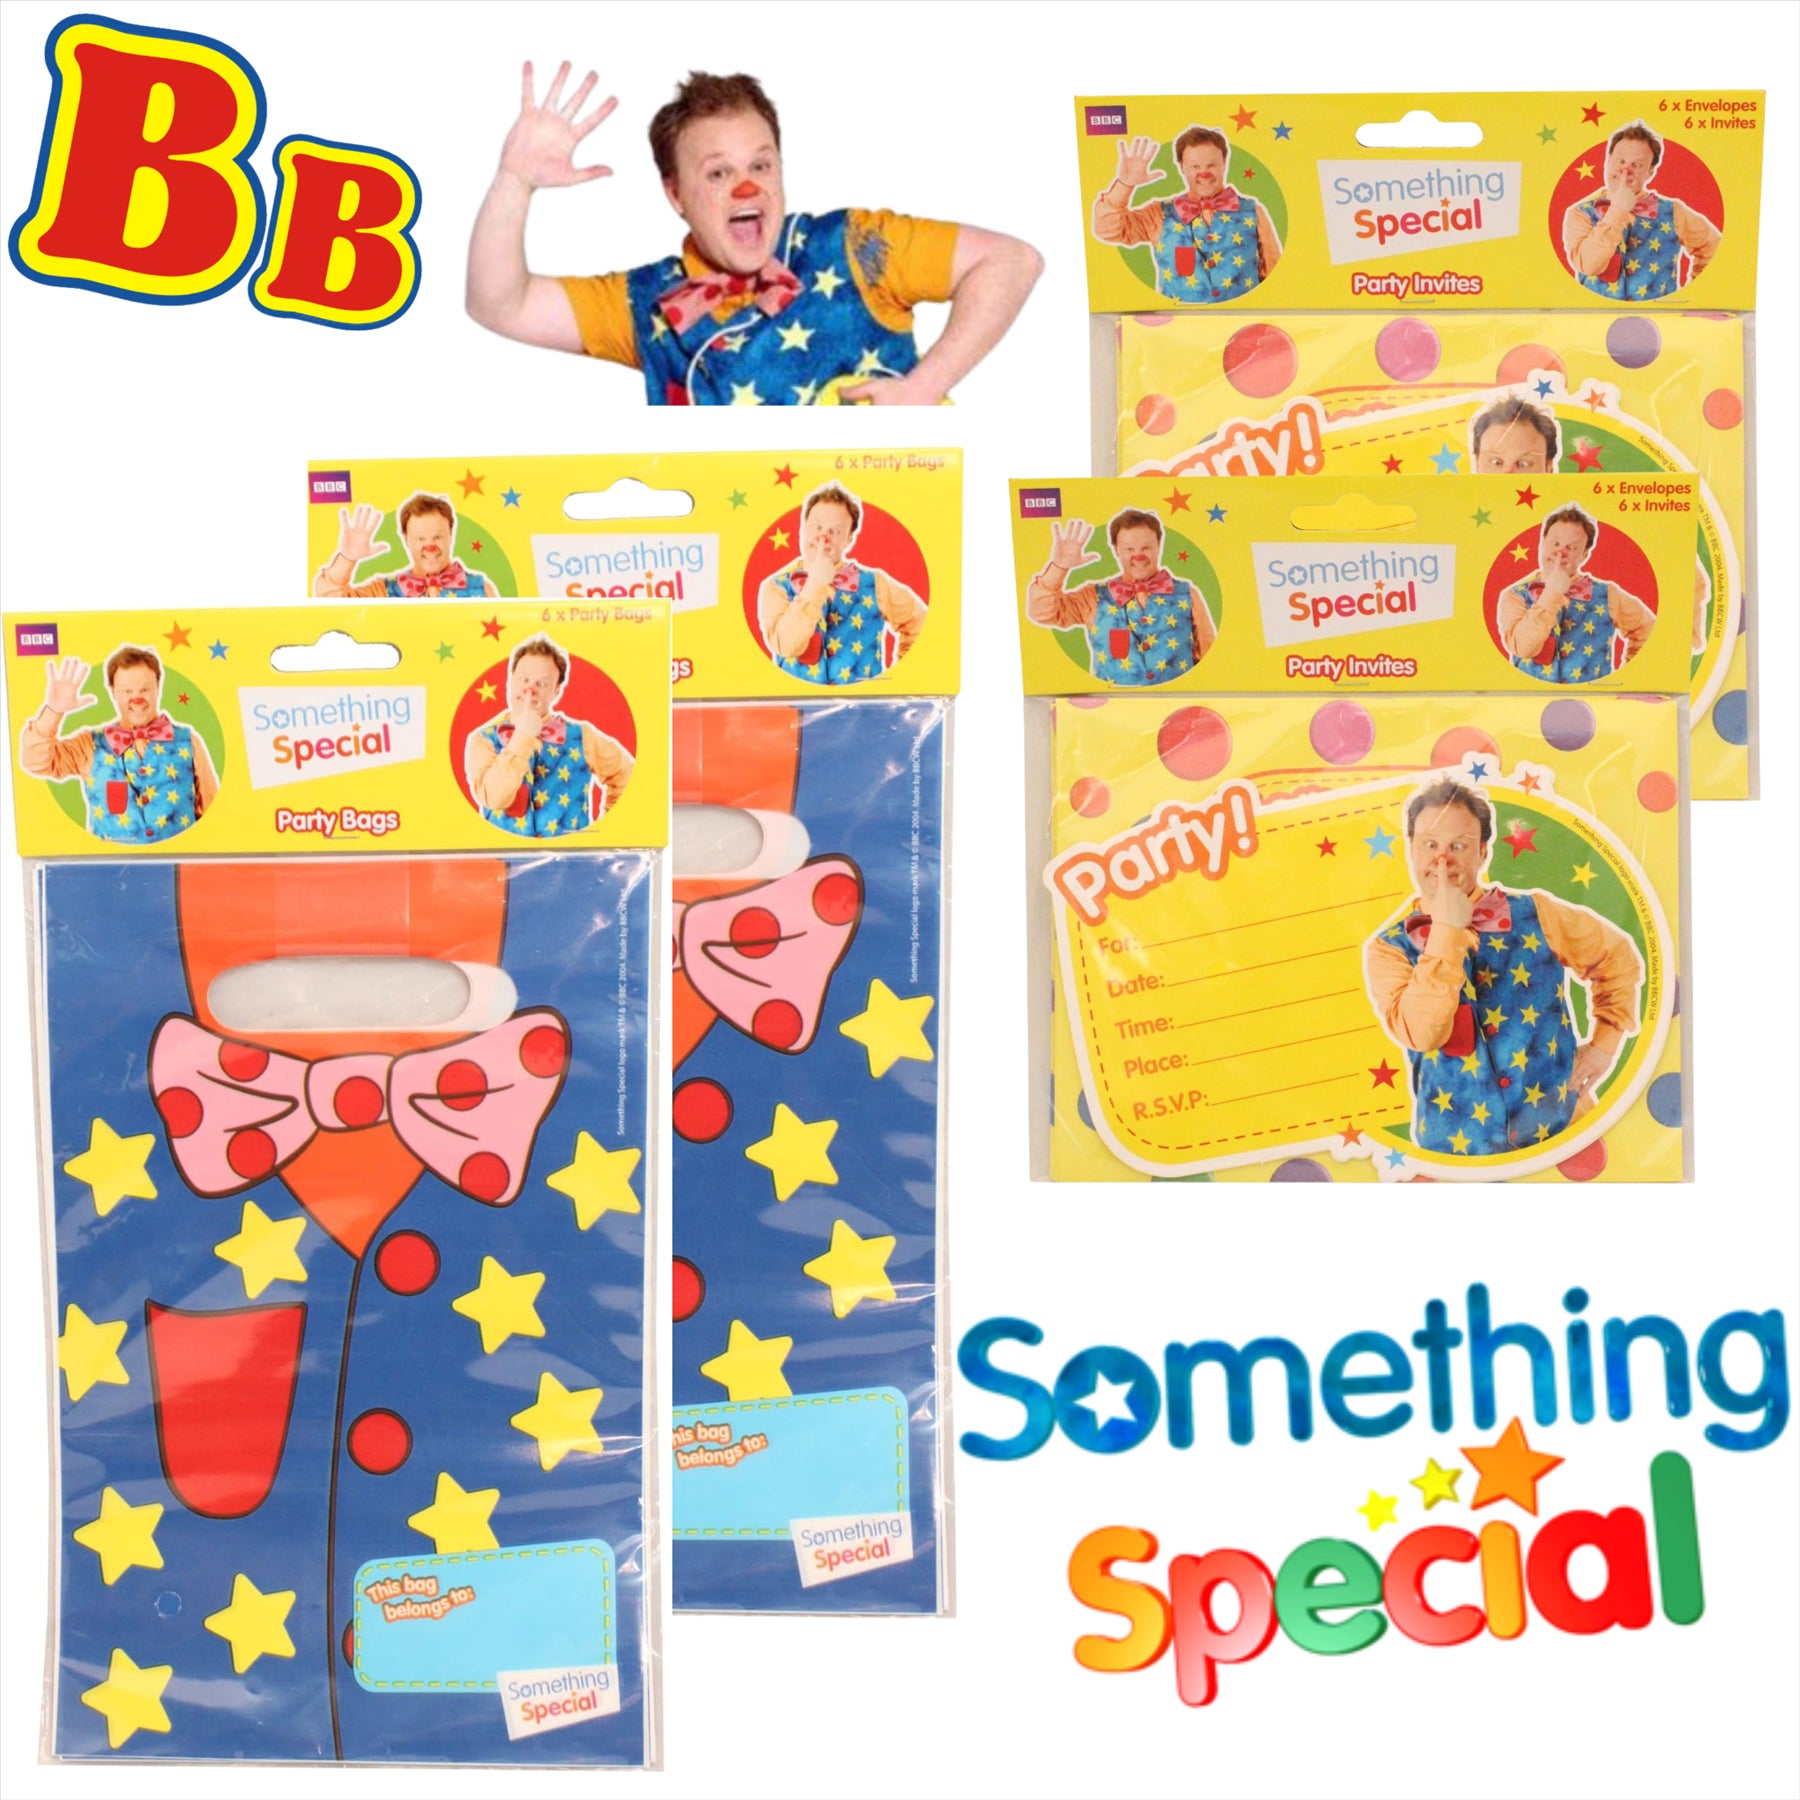 Something Special Mr Tumble Childrens Partyware - Pack of 12 Invites & Party Bags - Toptoys2u